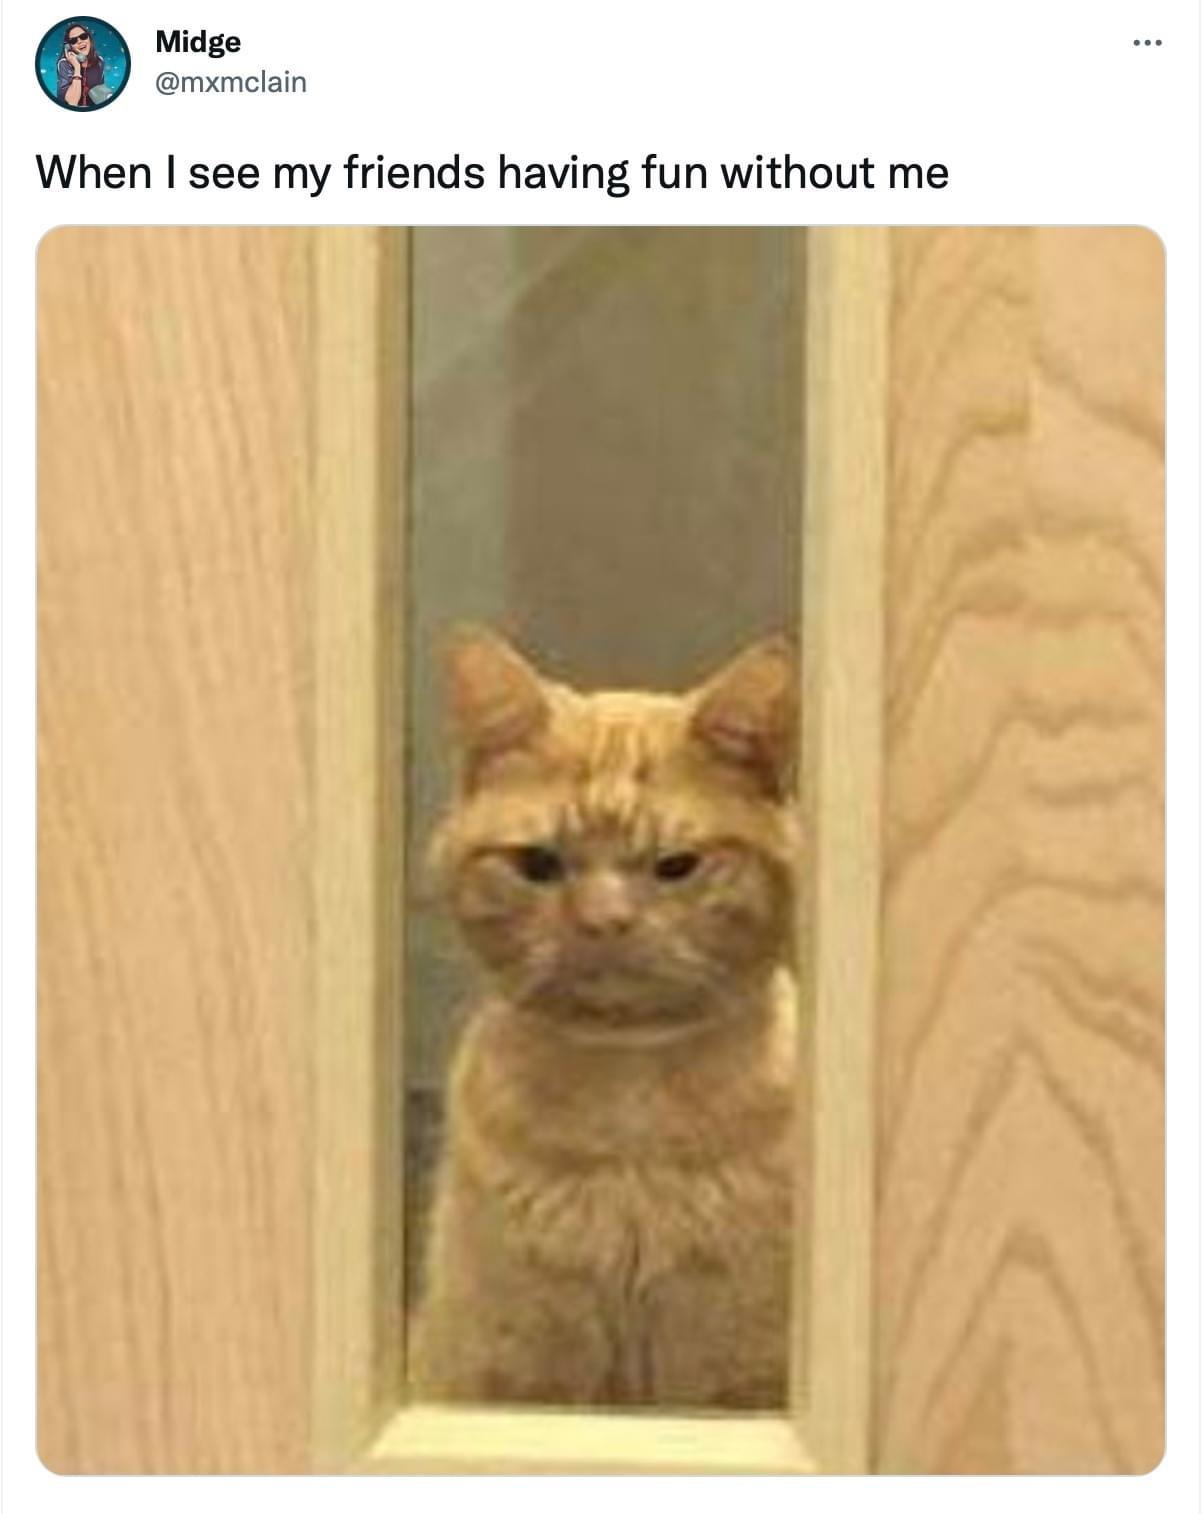 funny memes - saul the grumpy cat - Midge When I see my friends having fun without me